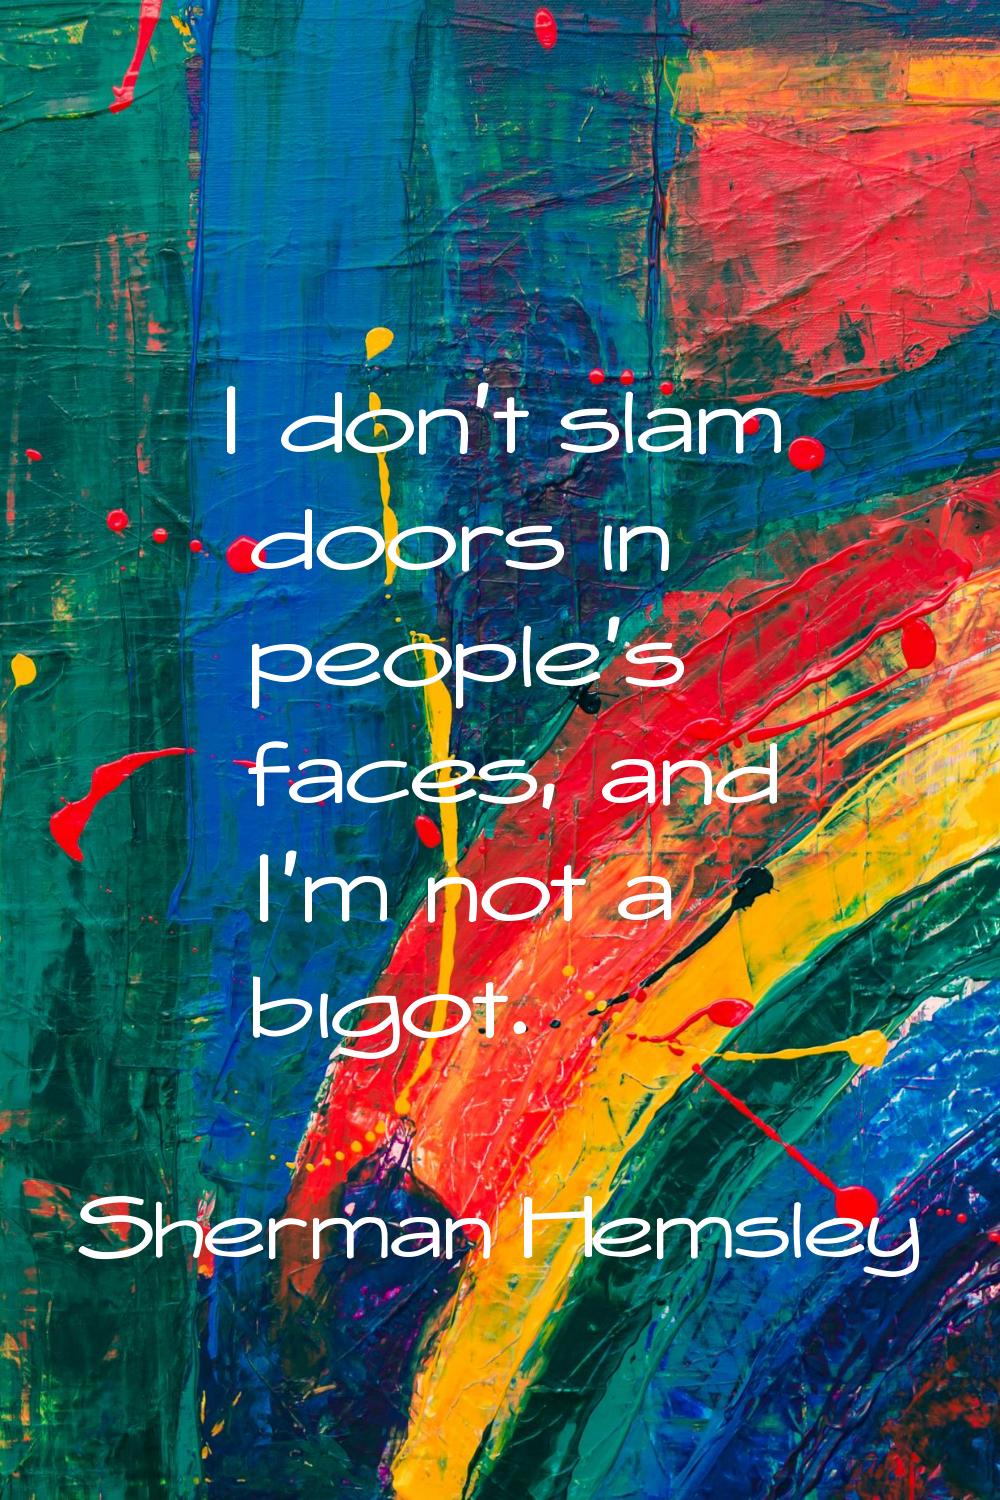 I don't slam doors in people's faces, and I'm not a bigot.